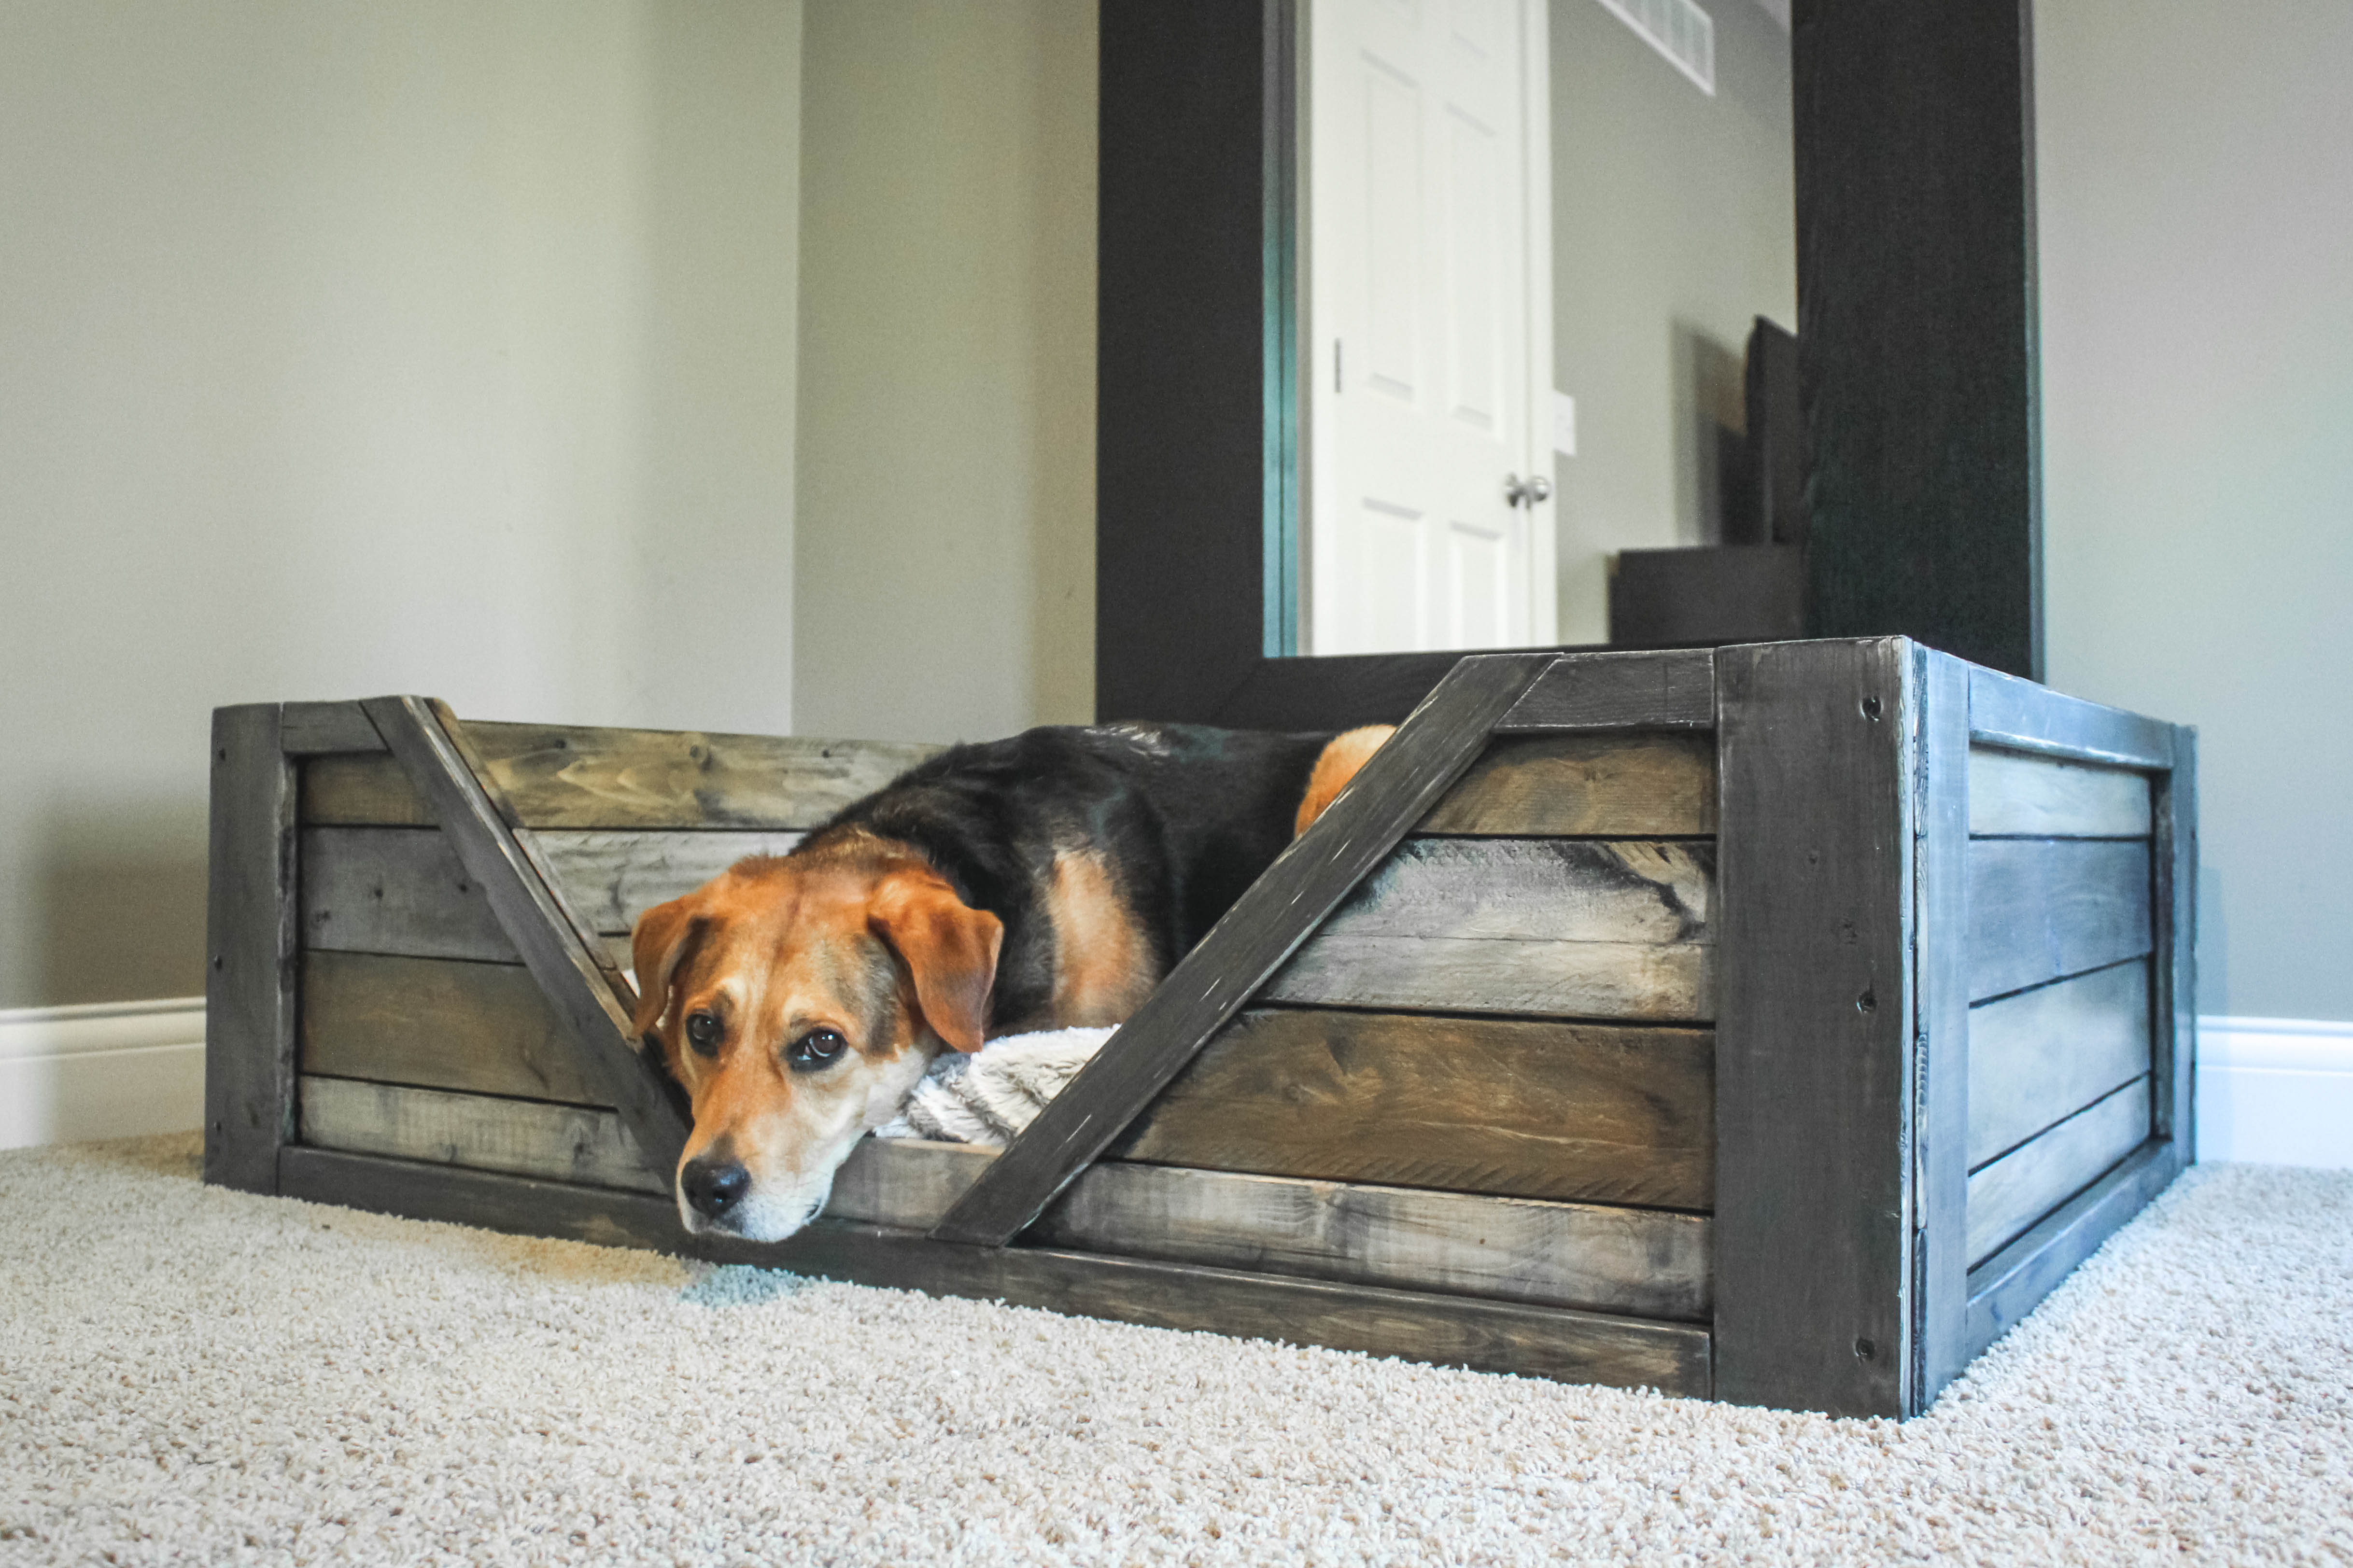 dog bed out of pallets